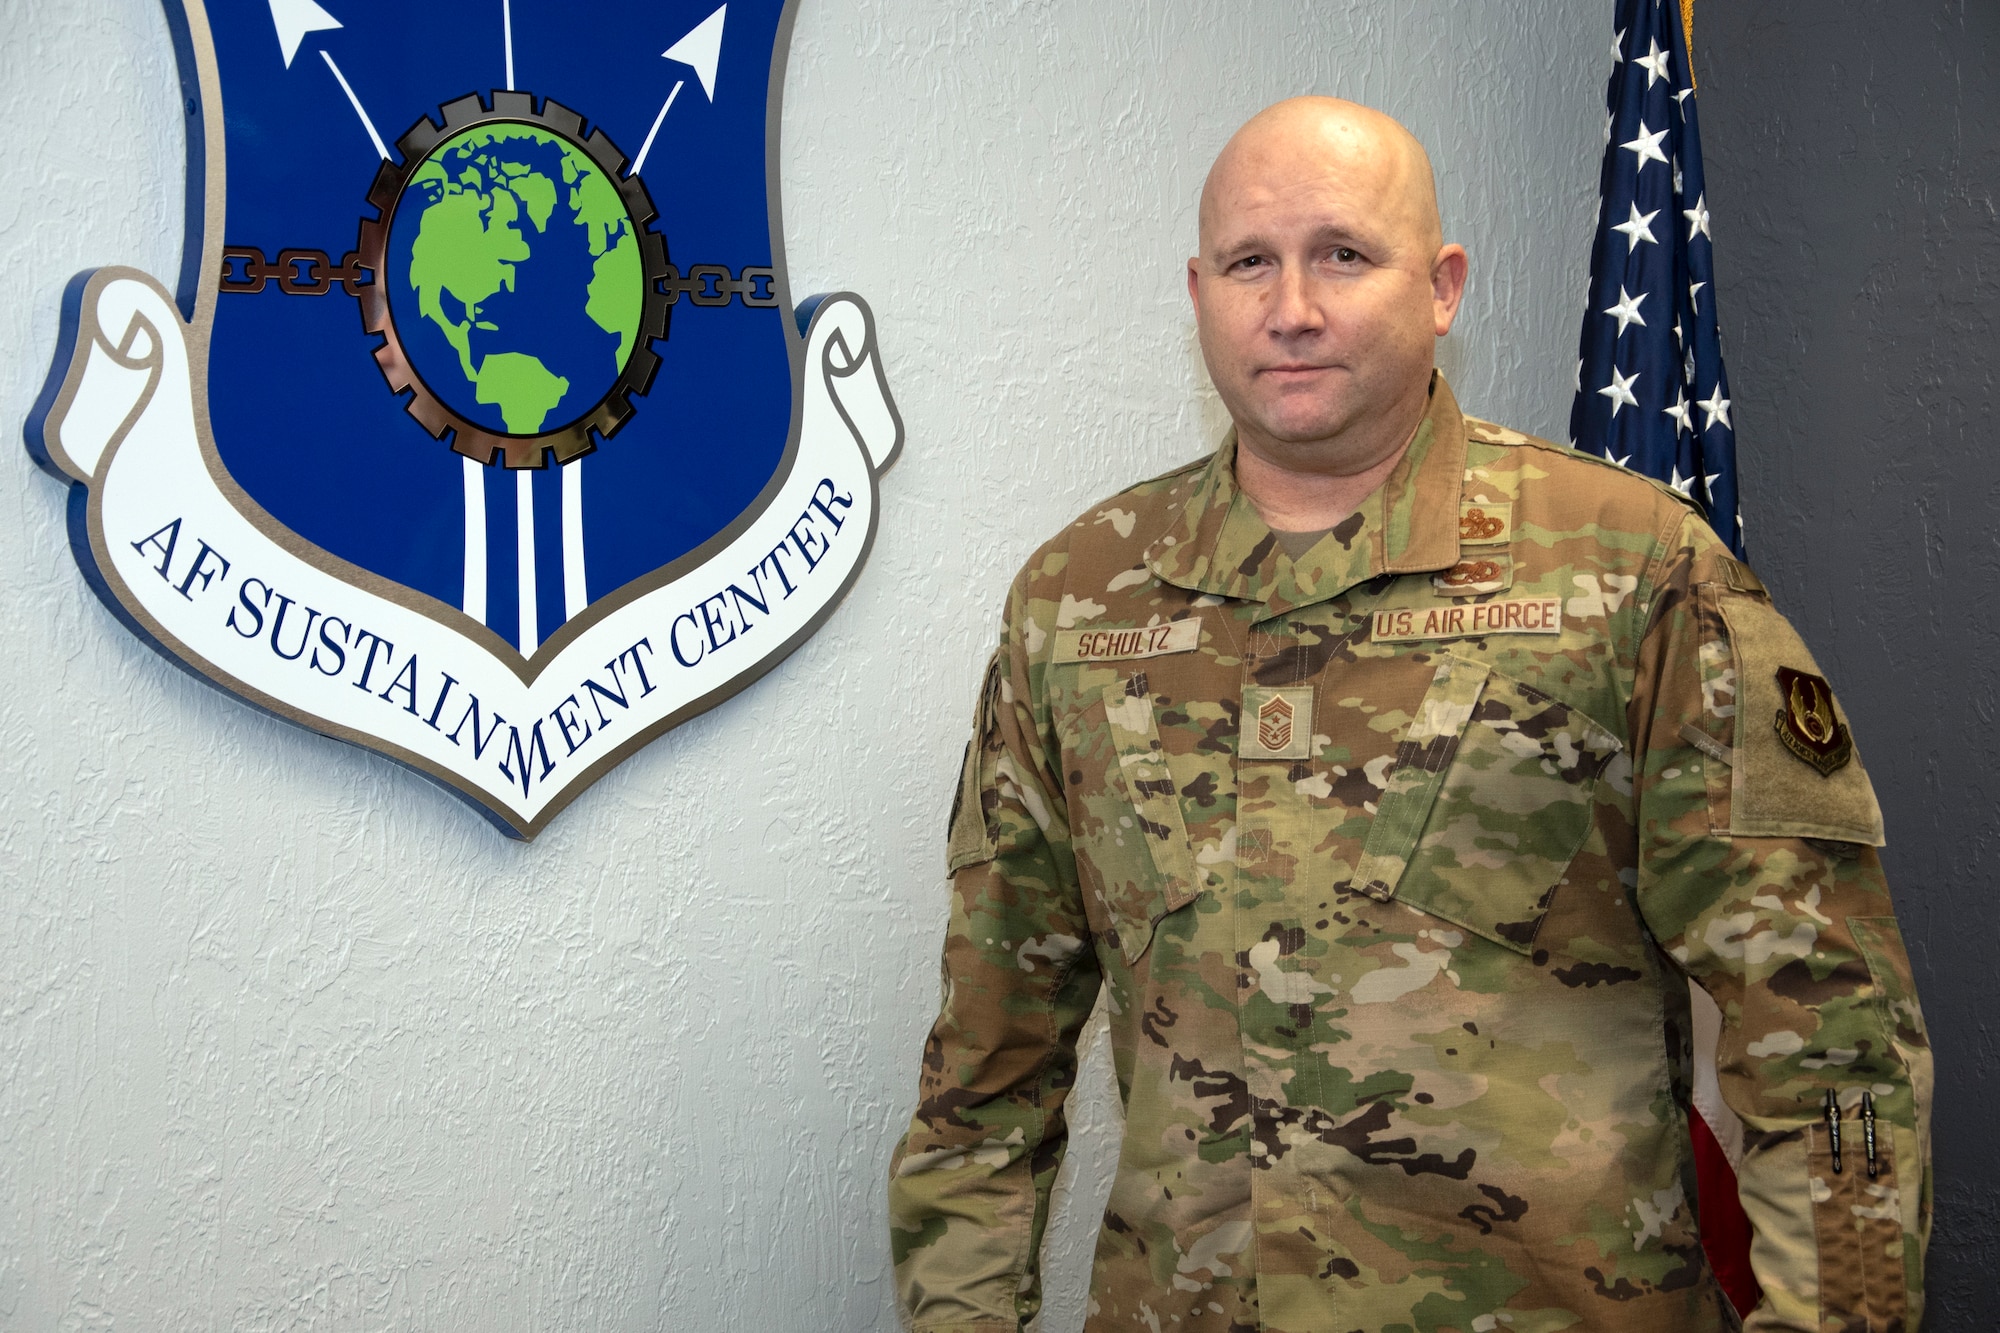 Air Force Sustainment Center Command Chief Master Sgt. Robert Schultz